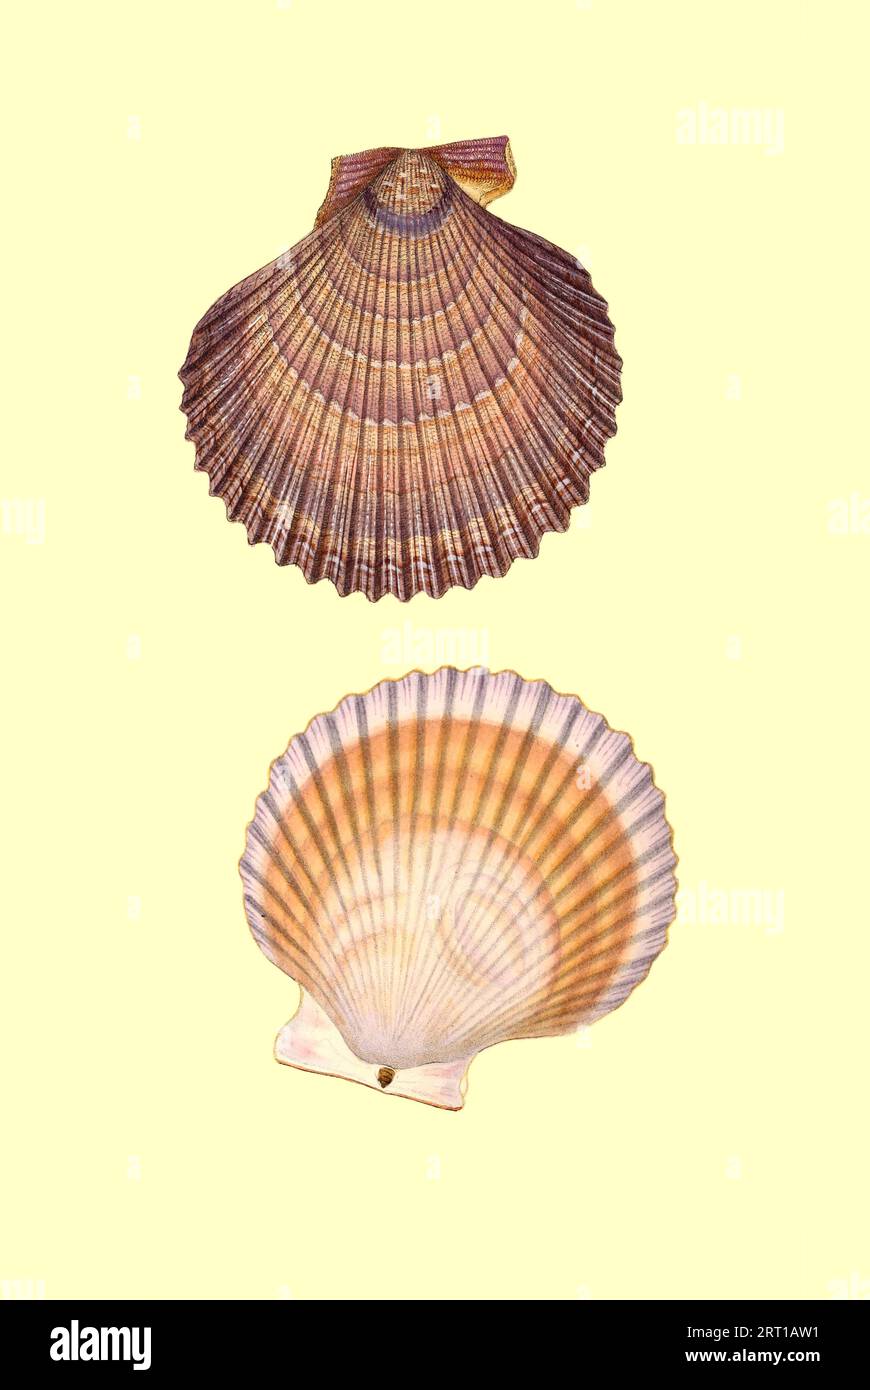 Ostrea matonii, Maton's Scollop or Pecten. Pecten is a genus of large scallops or saltwater clams, marine bivalve molluscs in the family Pectinidae, the scallops. Coloured Plate from ' The Naturalist's repository, or, Monthly miscellany of exotic natural history by Donovan, E. (Edward), 1768-1837 Volume 3 1825 Consisting of elegantly coloured plates with appropriate scientific and general directions of the most curious, scarce, and beautiful productions of nature that have been recently discovered in various parts of the world the latest improvements in the various department of science most i Stock Photo